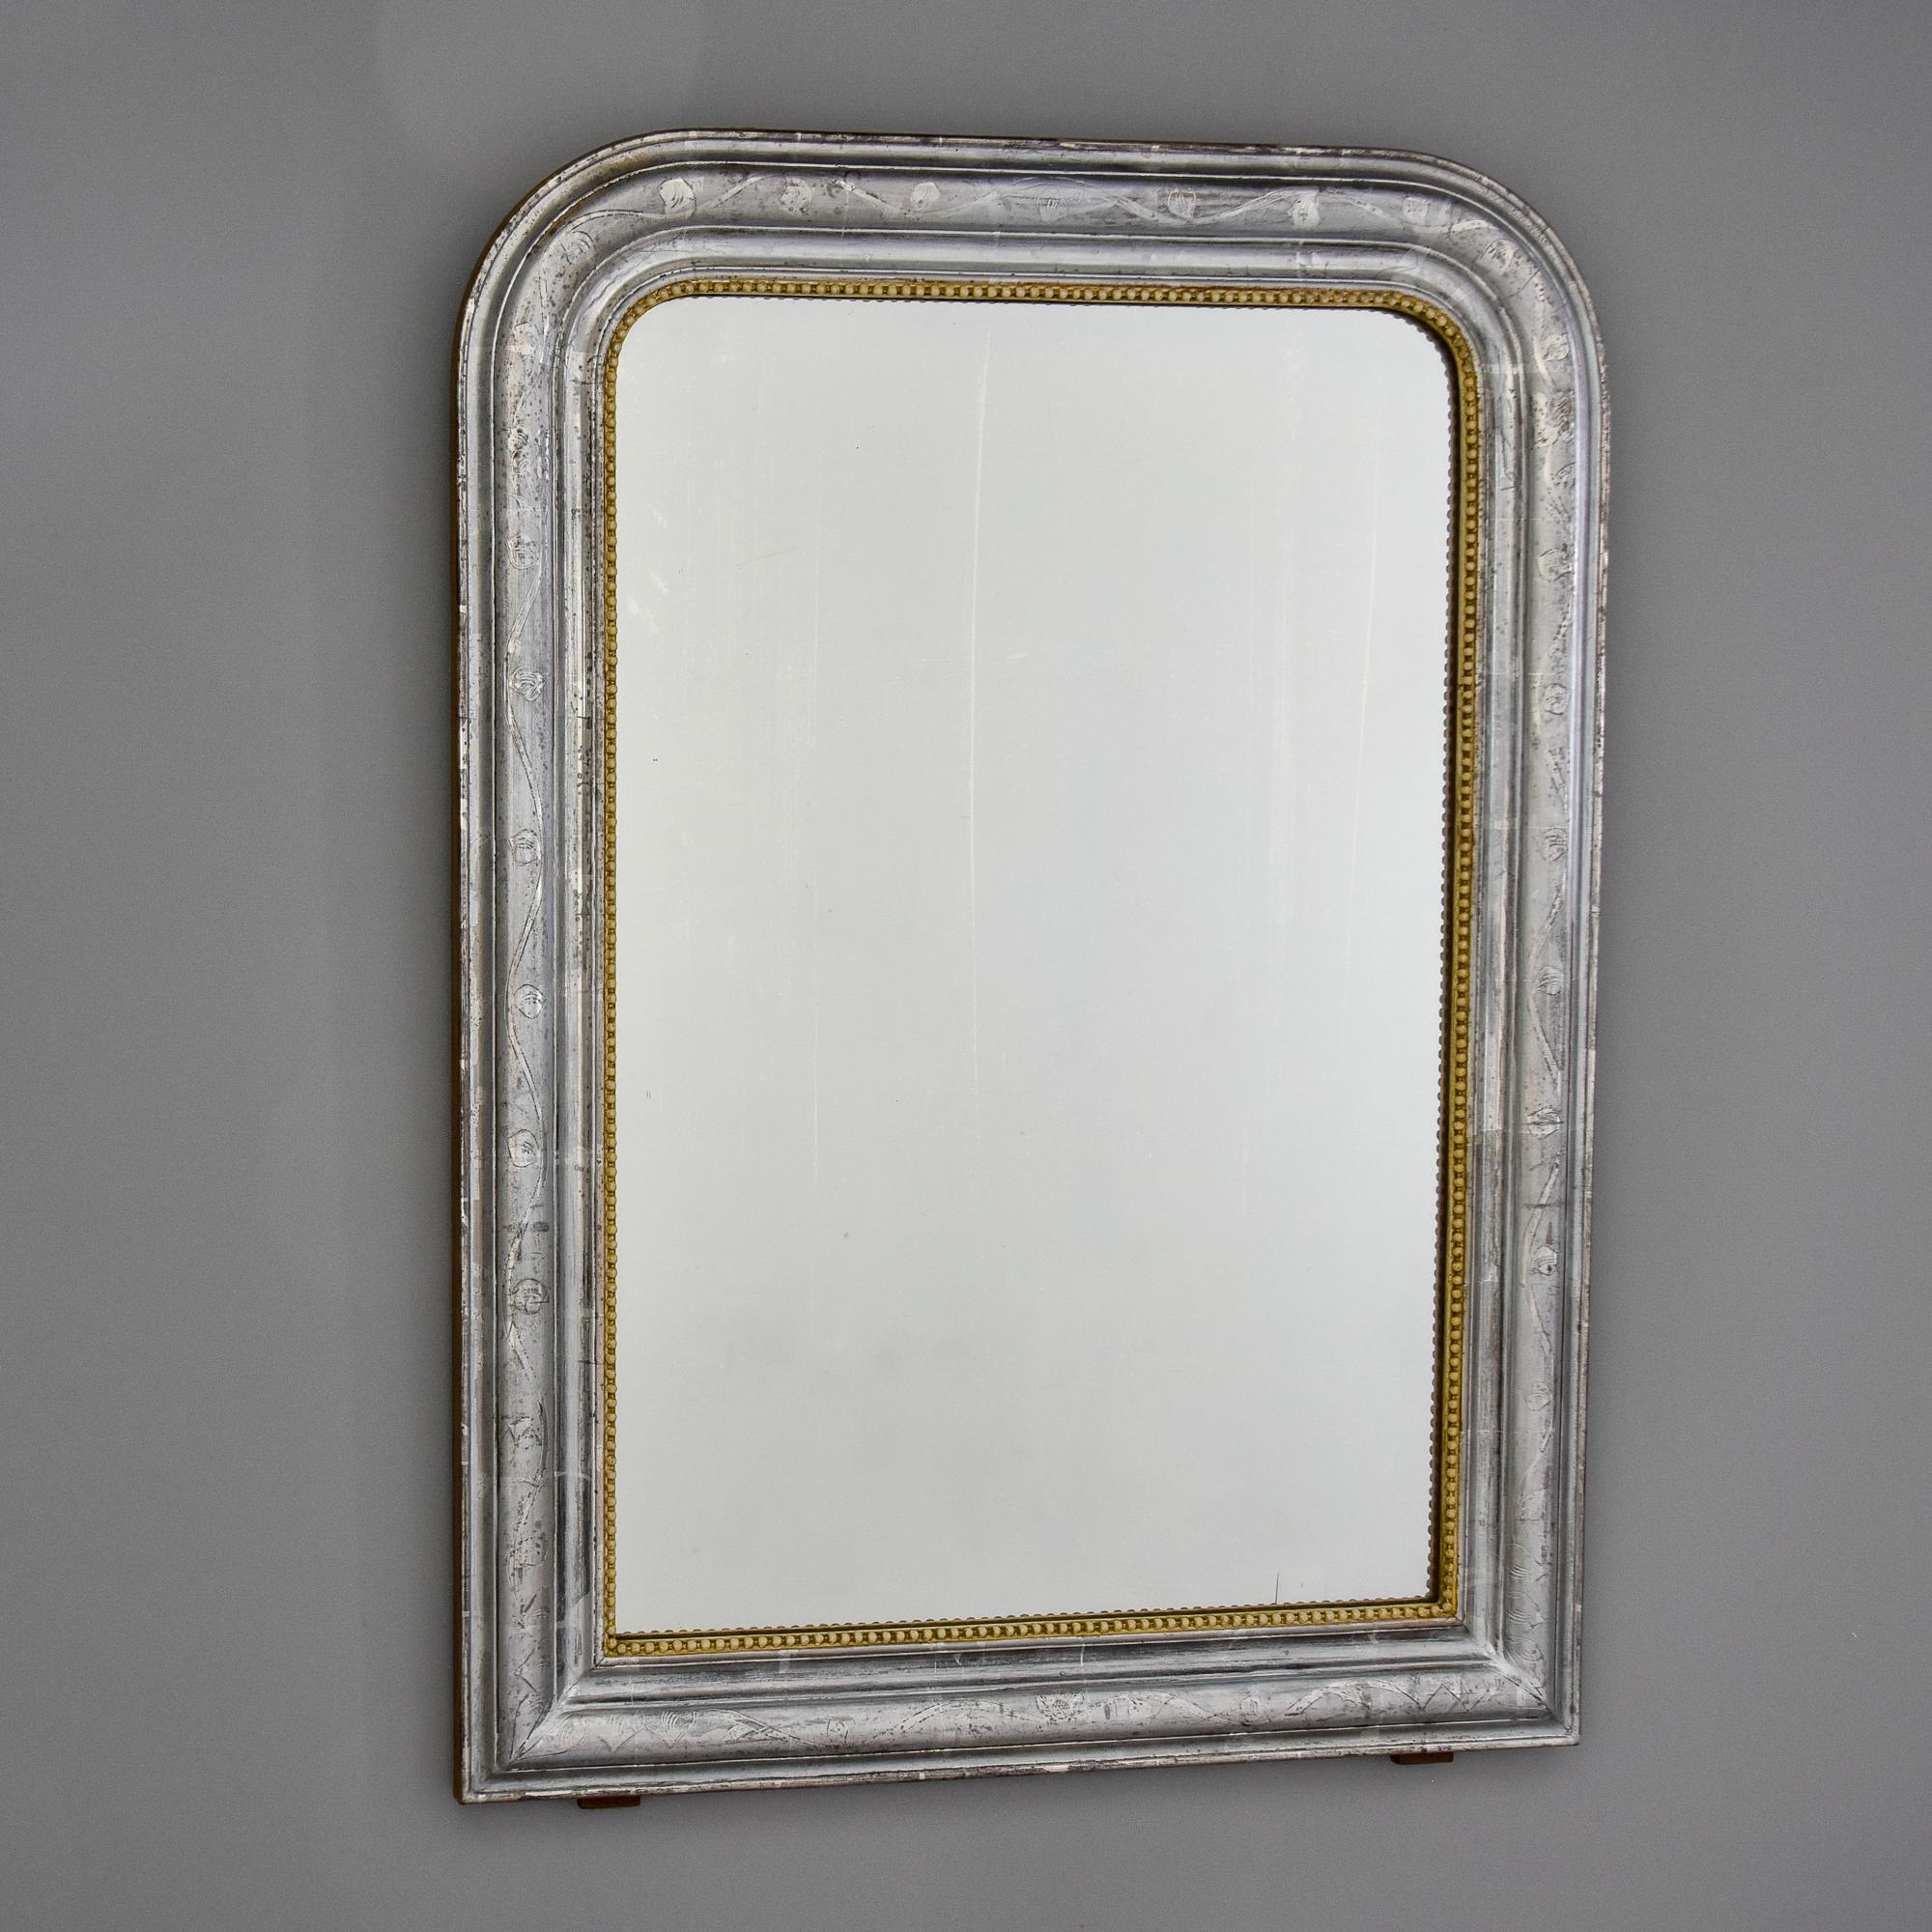 Found in France, this silver leaf Louis Philippe mirror frame dates from the 1870s. Based on the condition of the actual mirror, we think the mirror was replaced at some point. We found the mirror in France as shown. Frame has etched leaf and vine